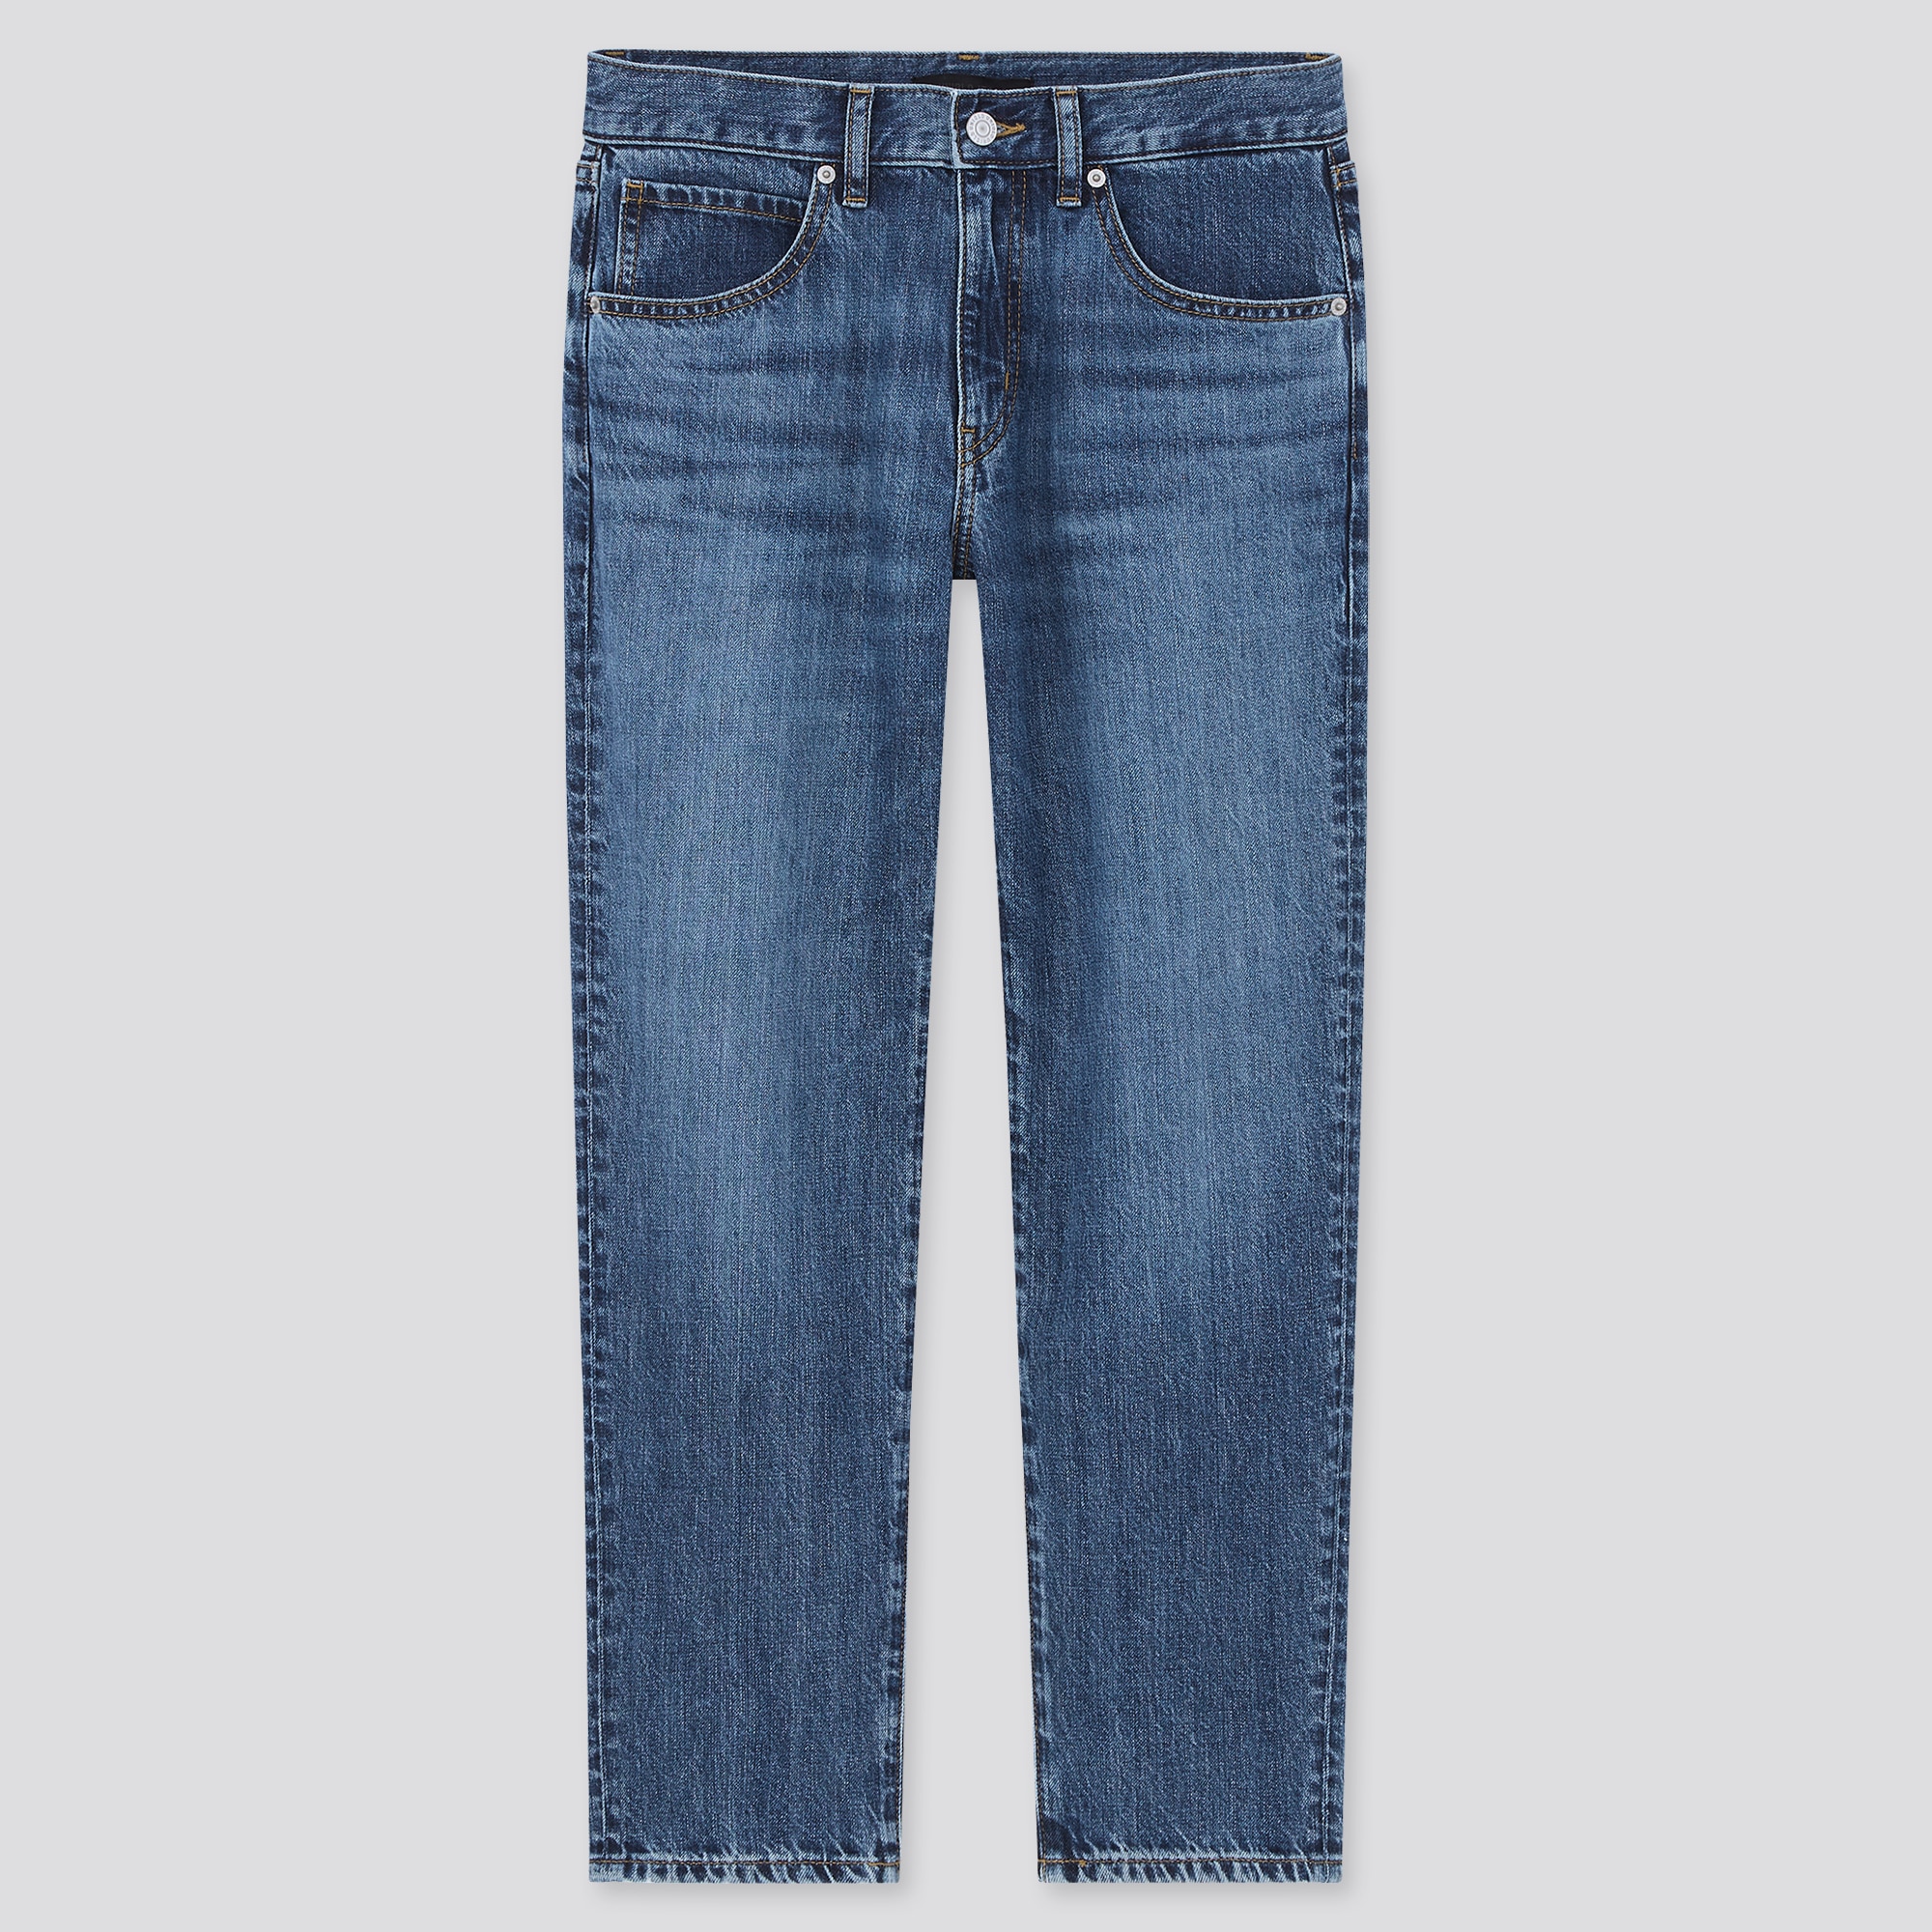 Uniqlo Ultra Stretch Denim Leggings Pants – the best products in the Joom  Geek online store